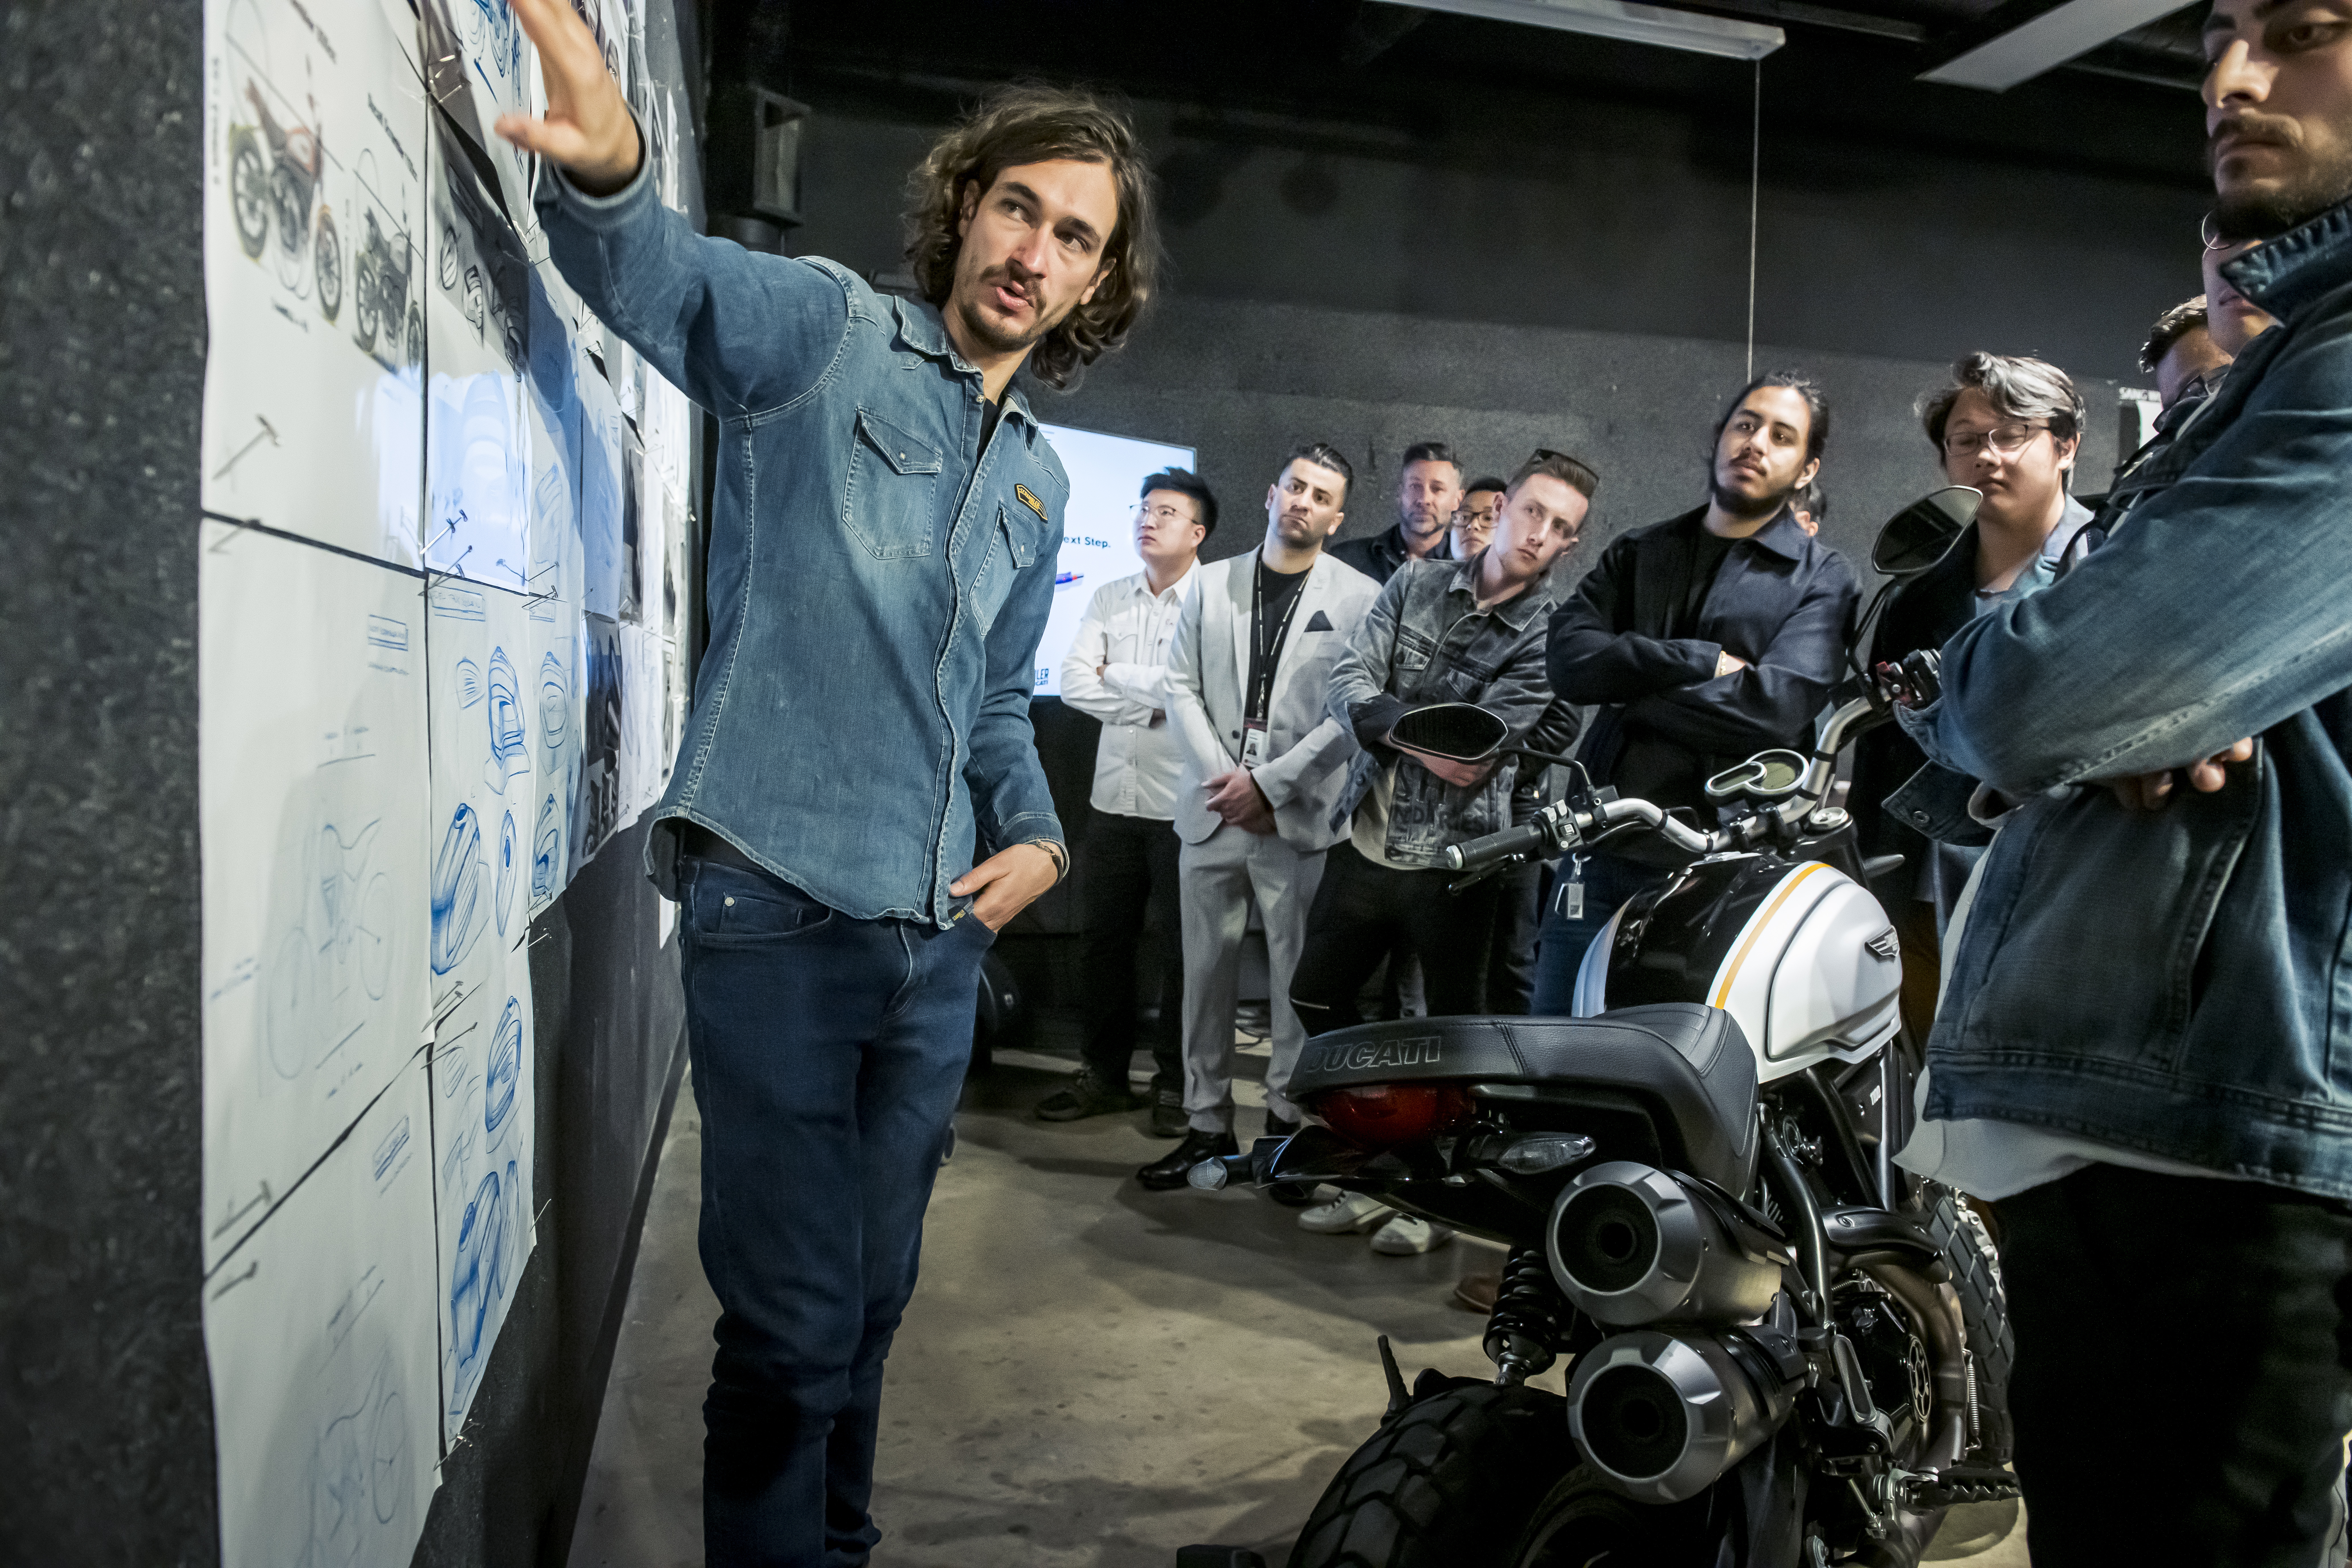 Photo of Ducati designer Jeremy Faraud with students.